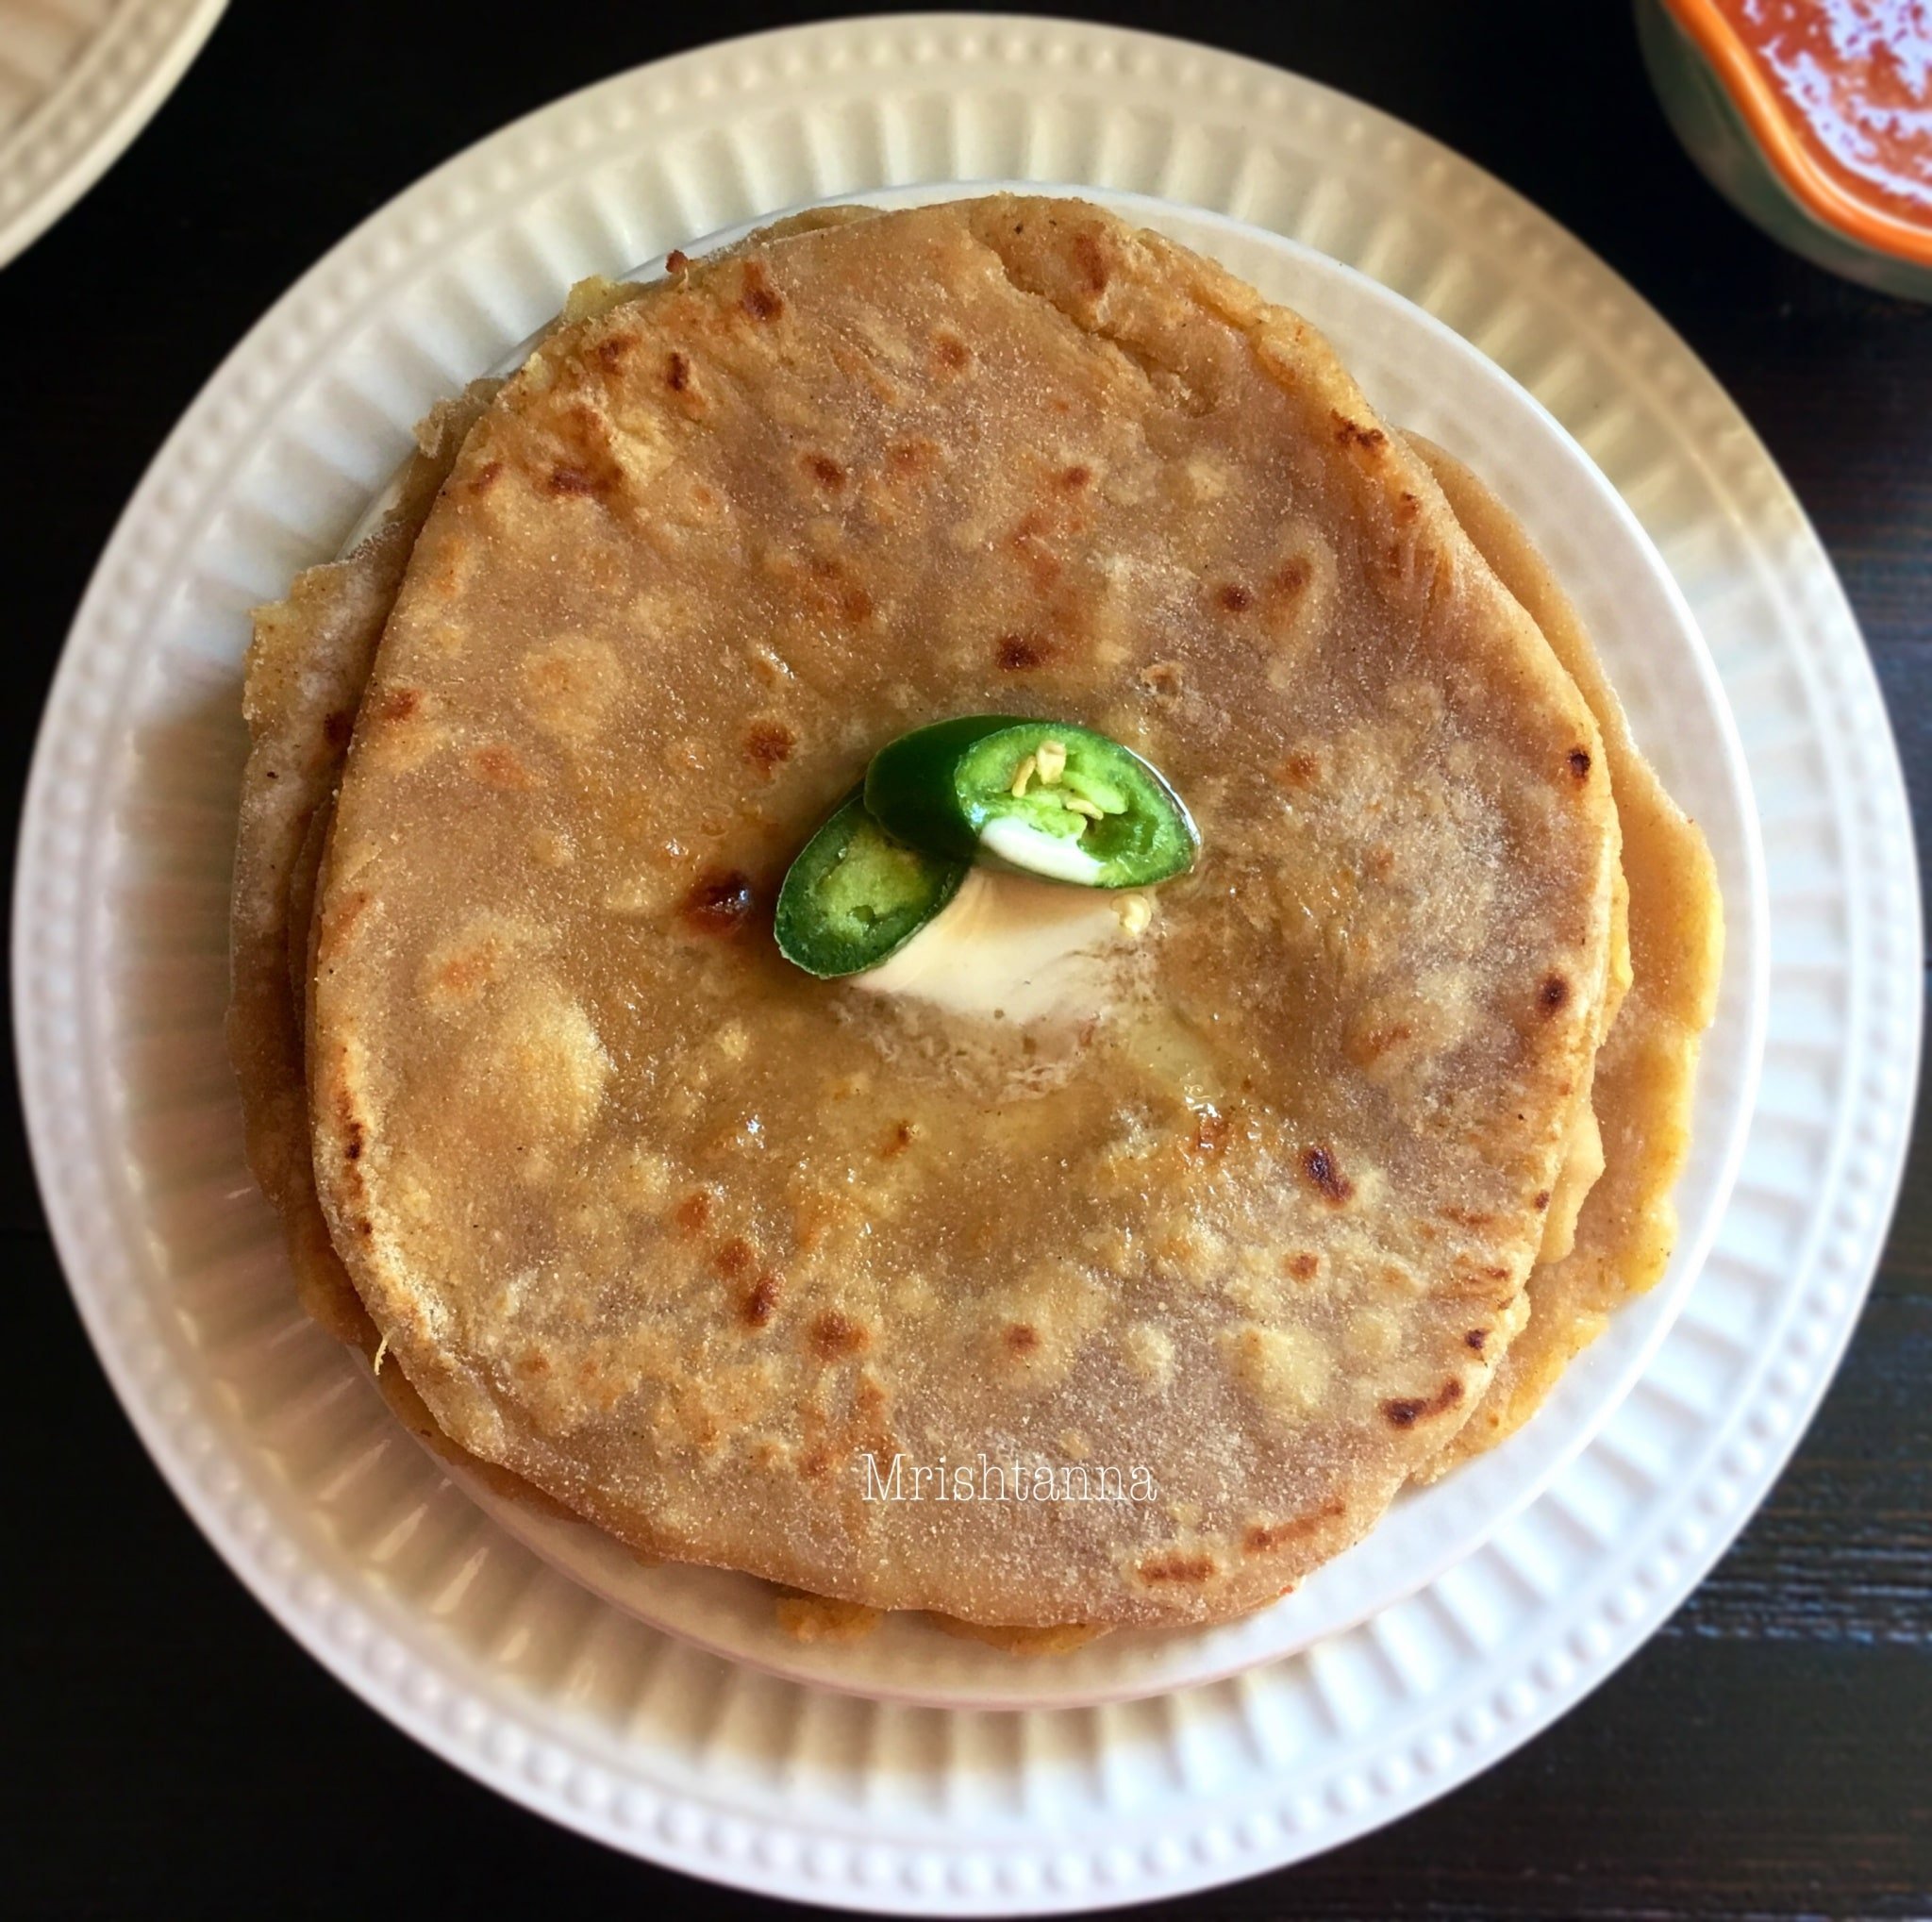 Paratha is stacked on the white serving plate